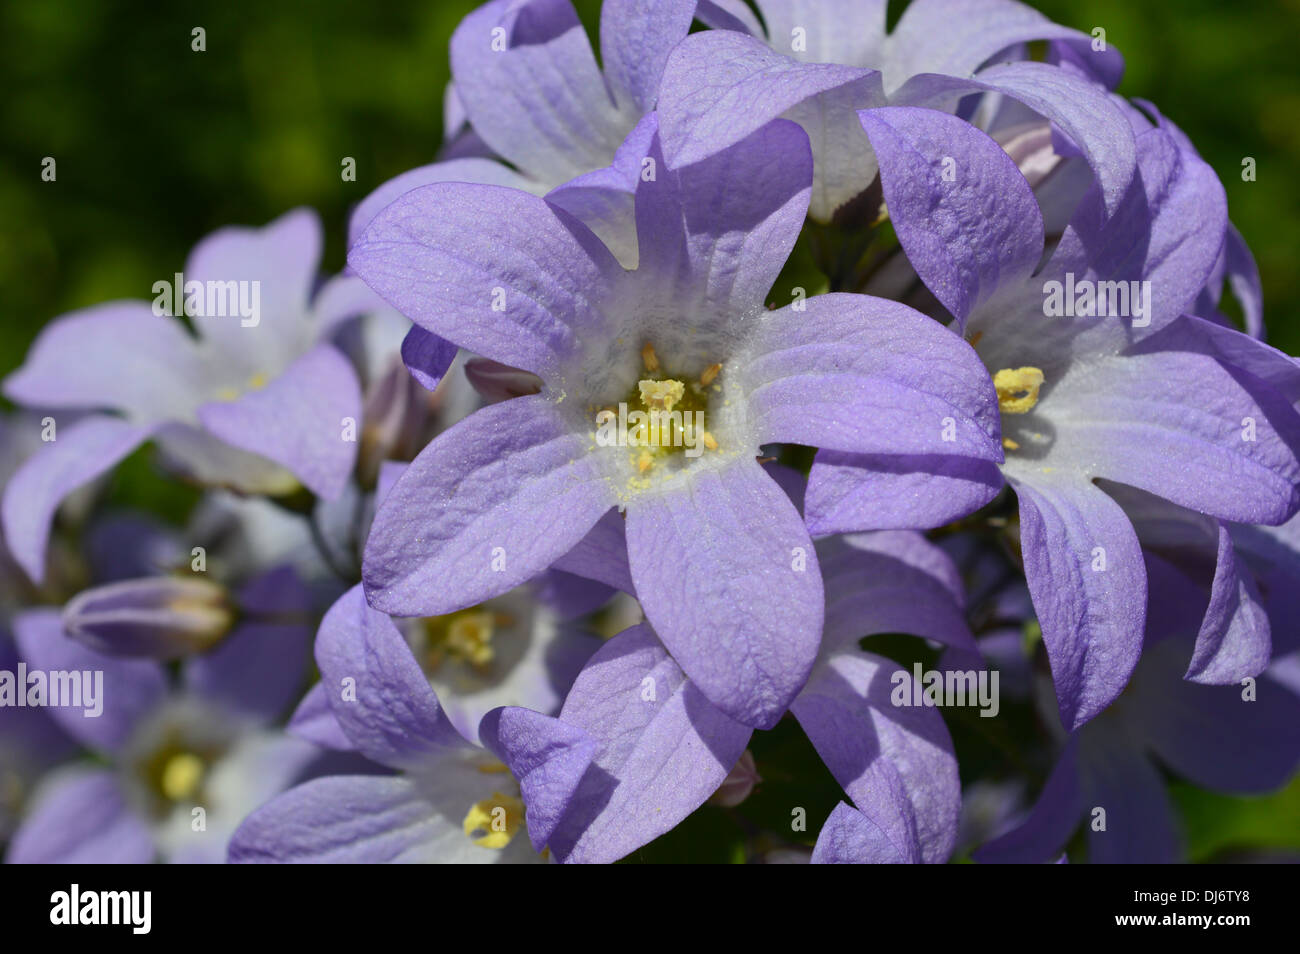 a stunning periwinkle blue star shaped flower in close up Stock Photo